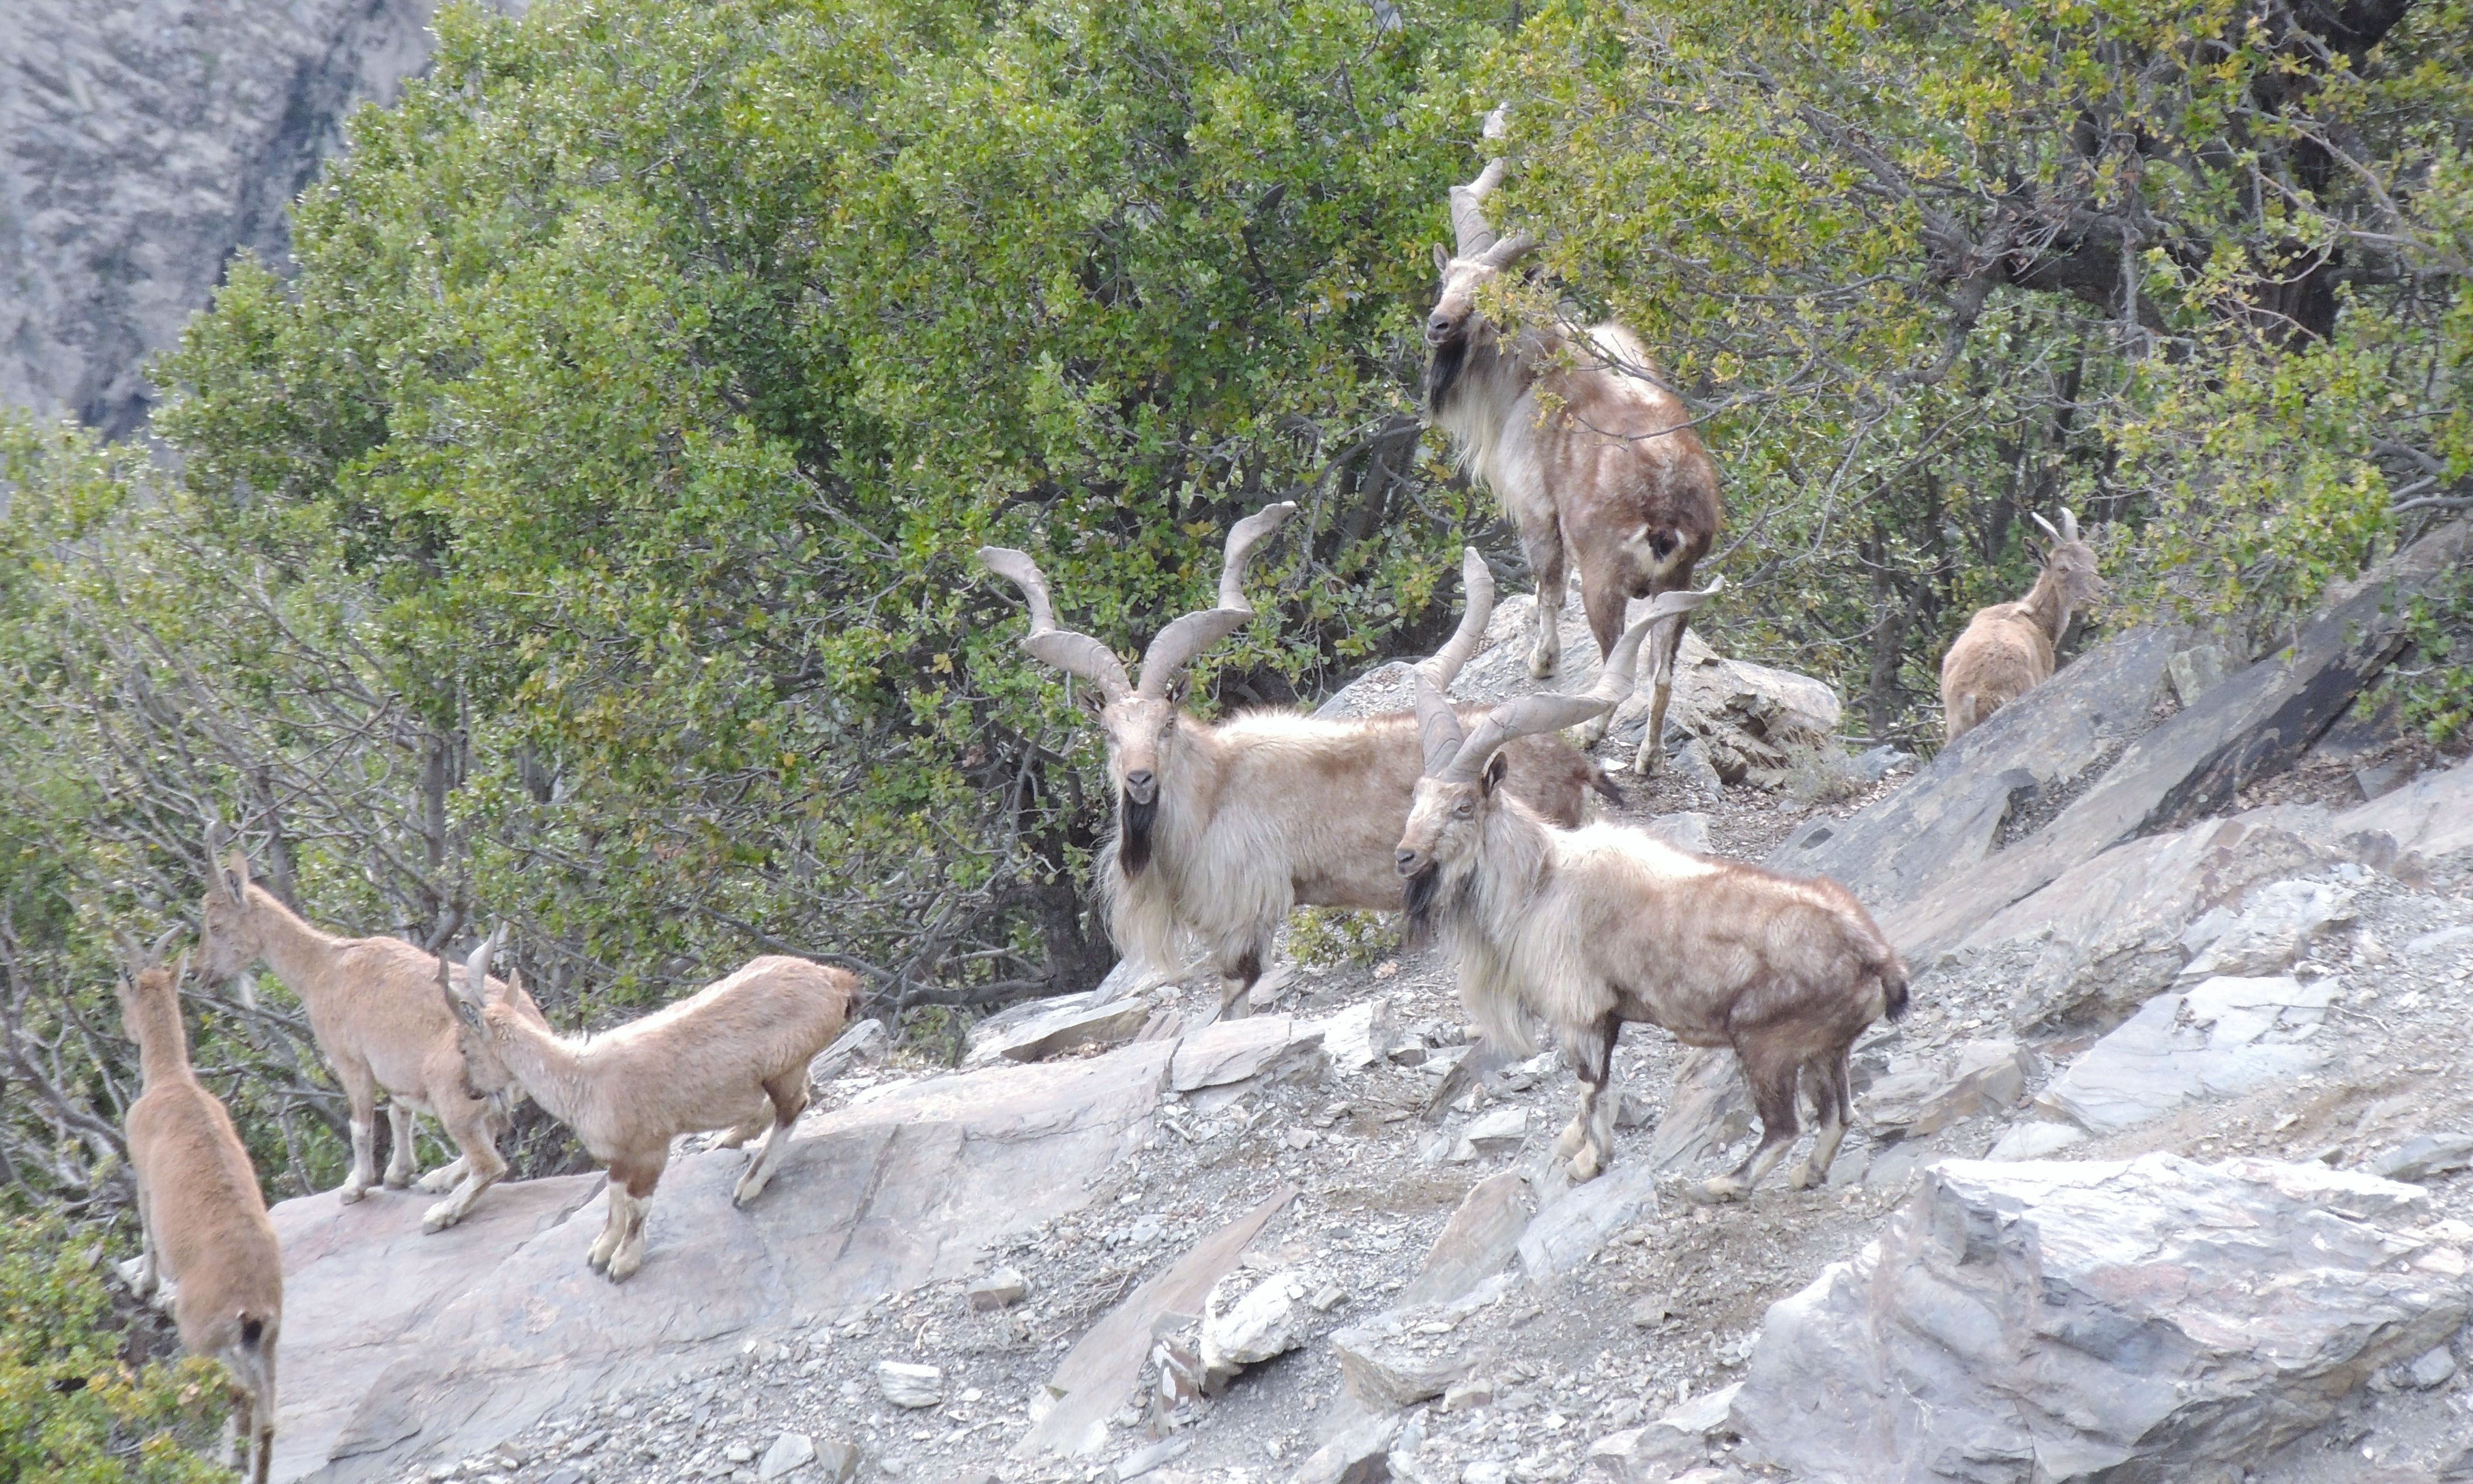 Markhor family in Chitral Gol National Park